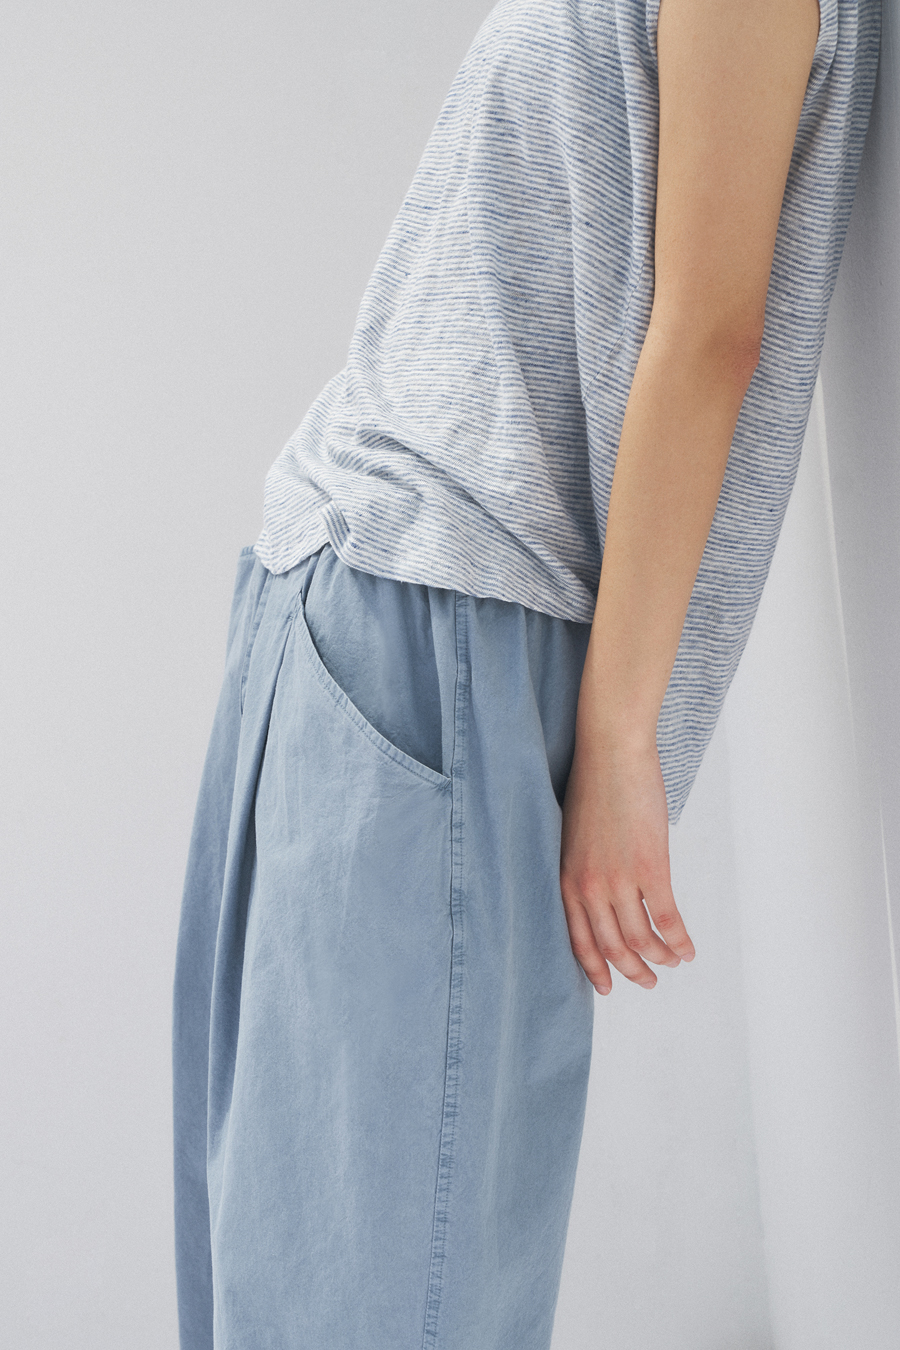 new real baggy pants  BLUE monochrome